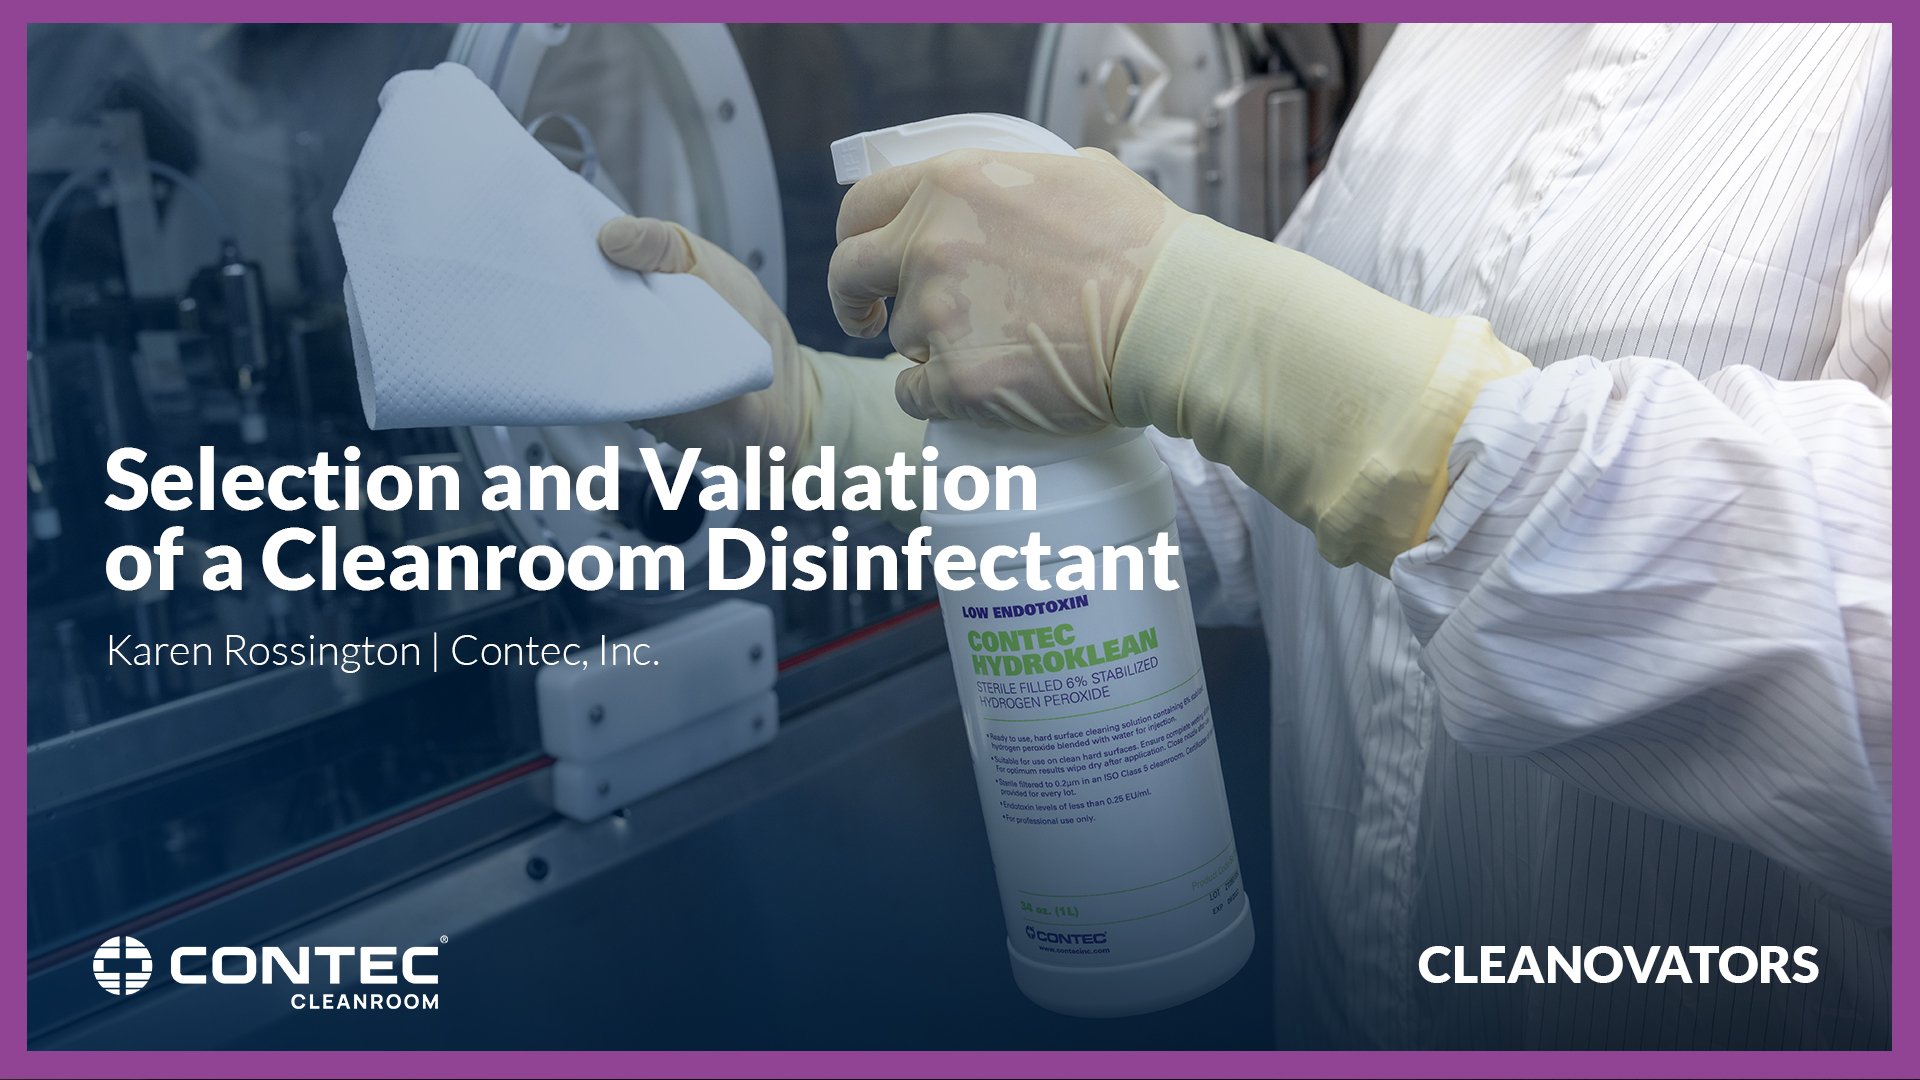 Selection and Validation of a Cleanroom Disinfectant